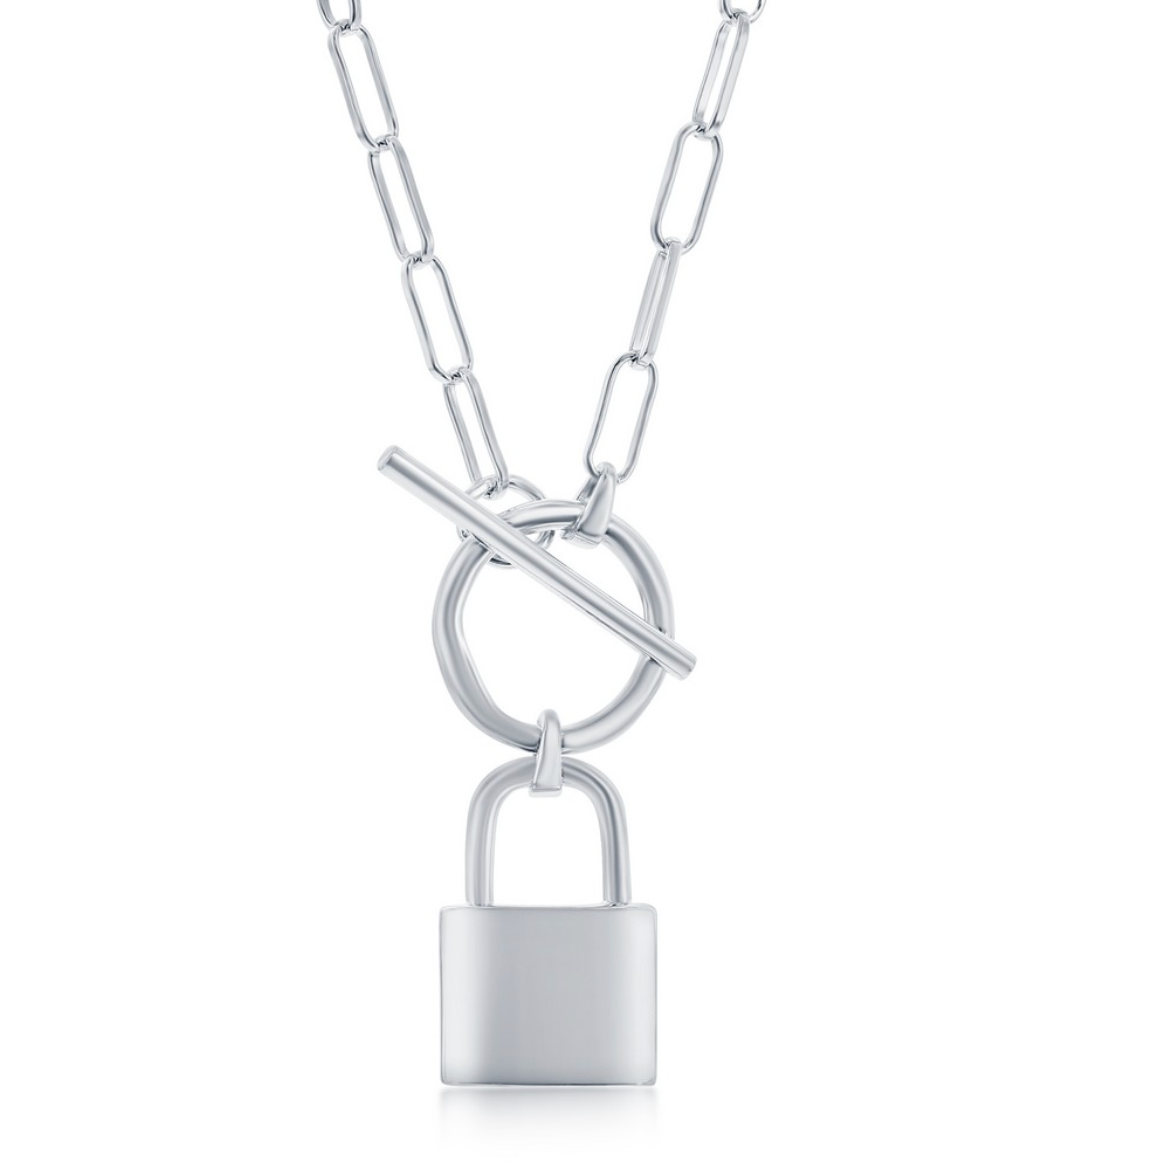 Sterling Silver Lock Charm Paperclip Necklace